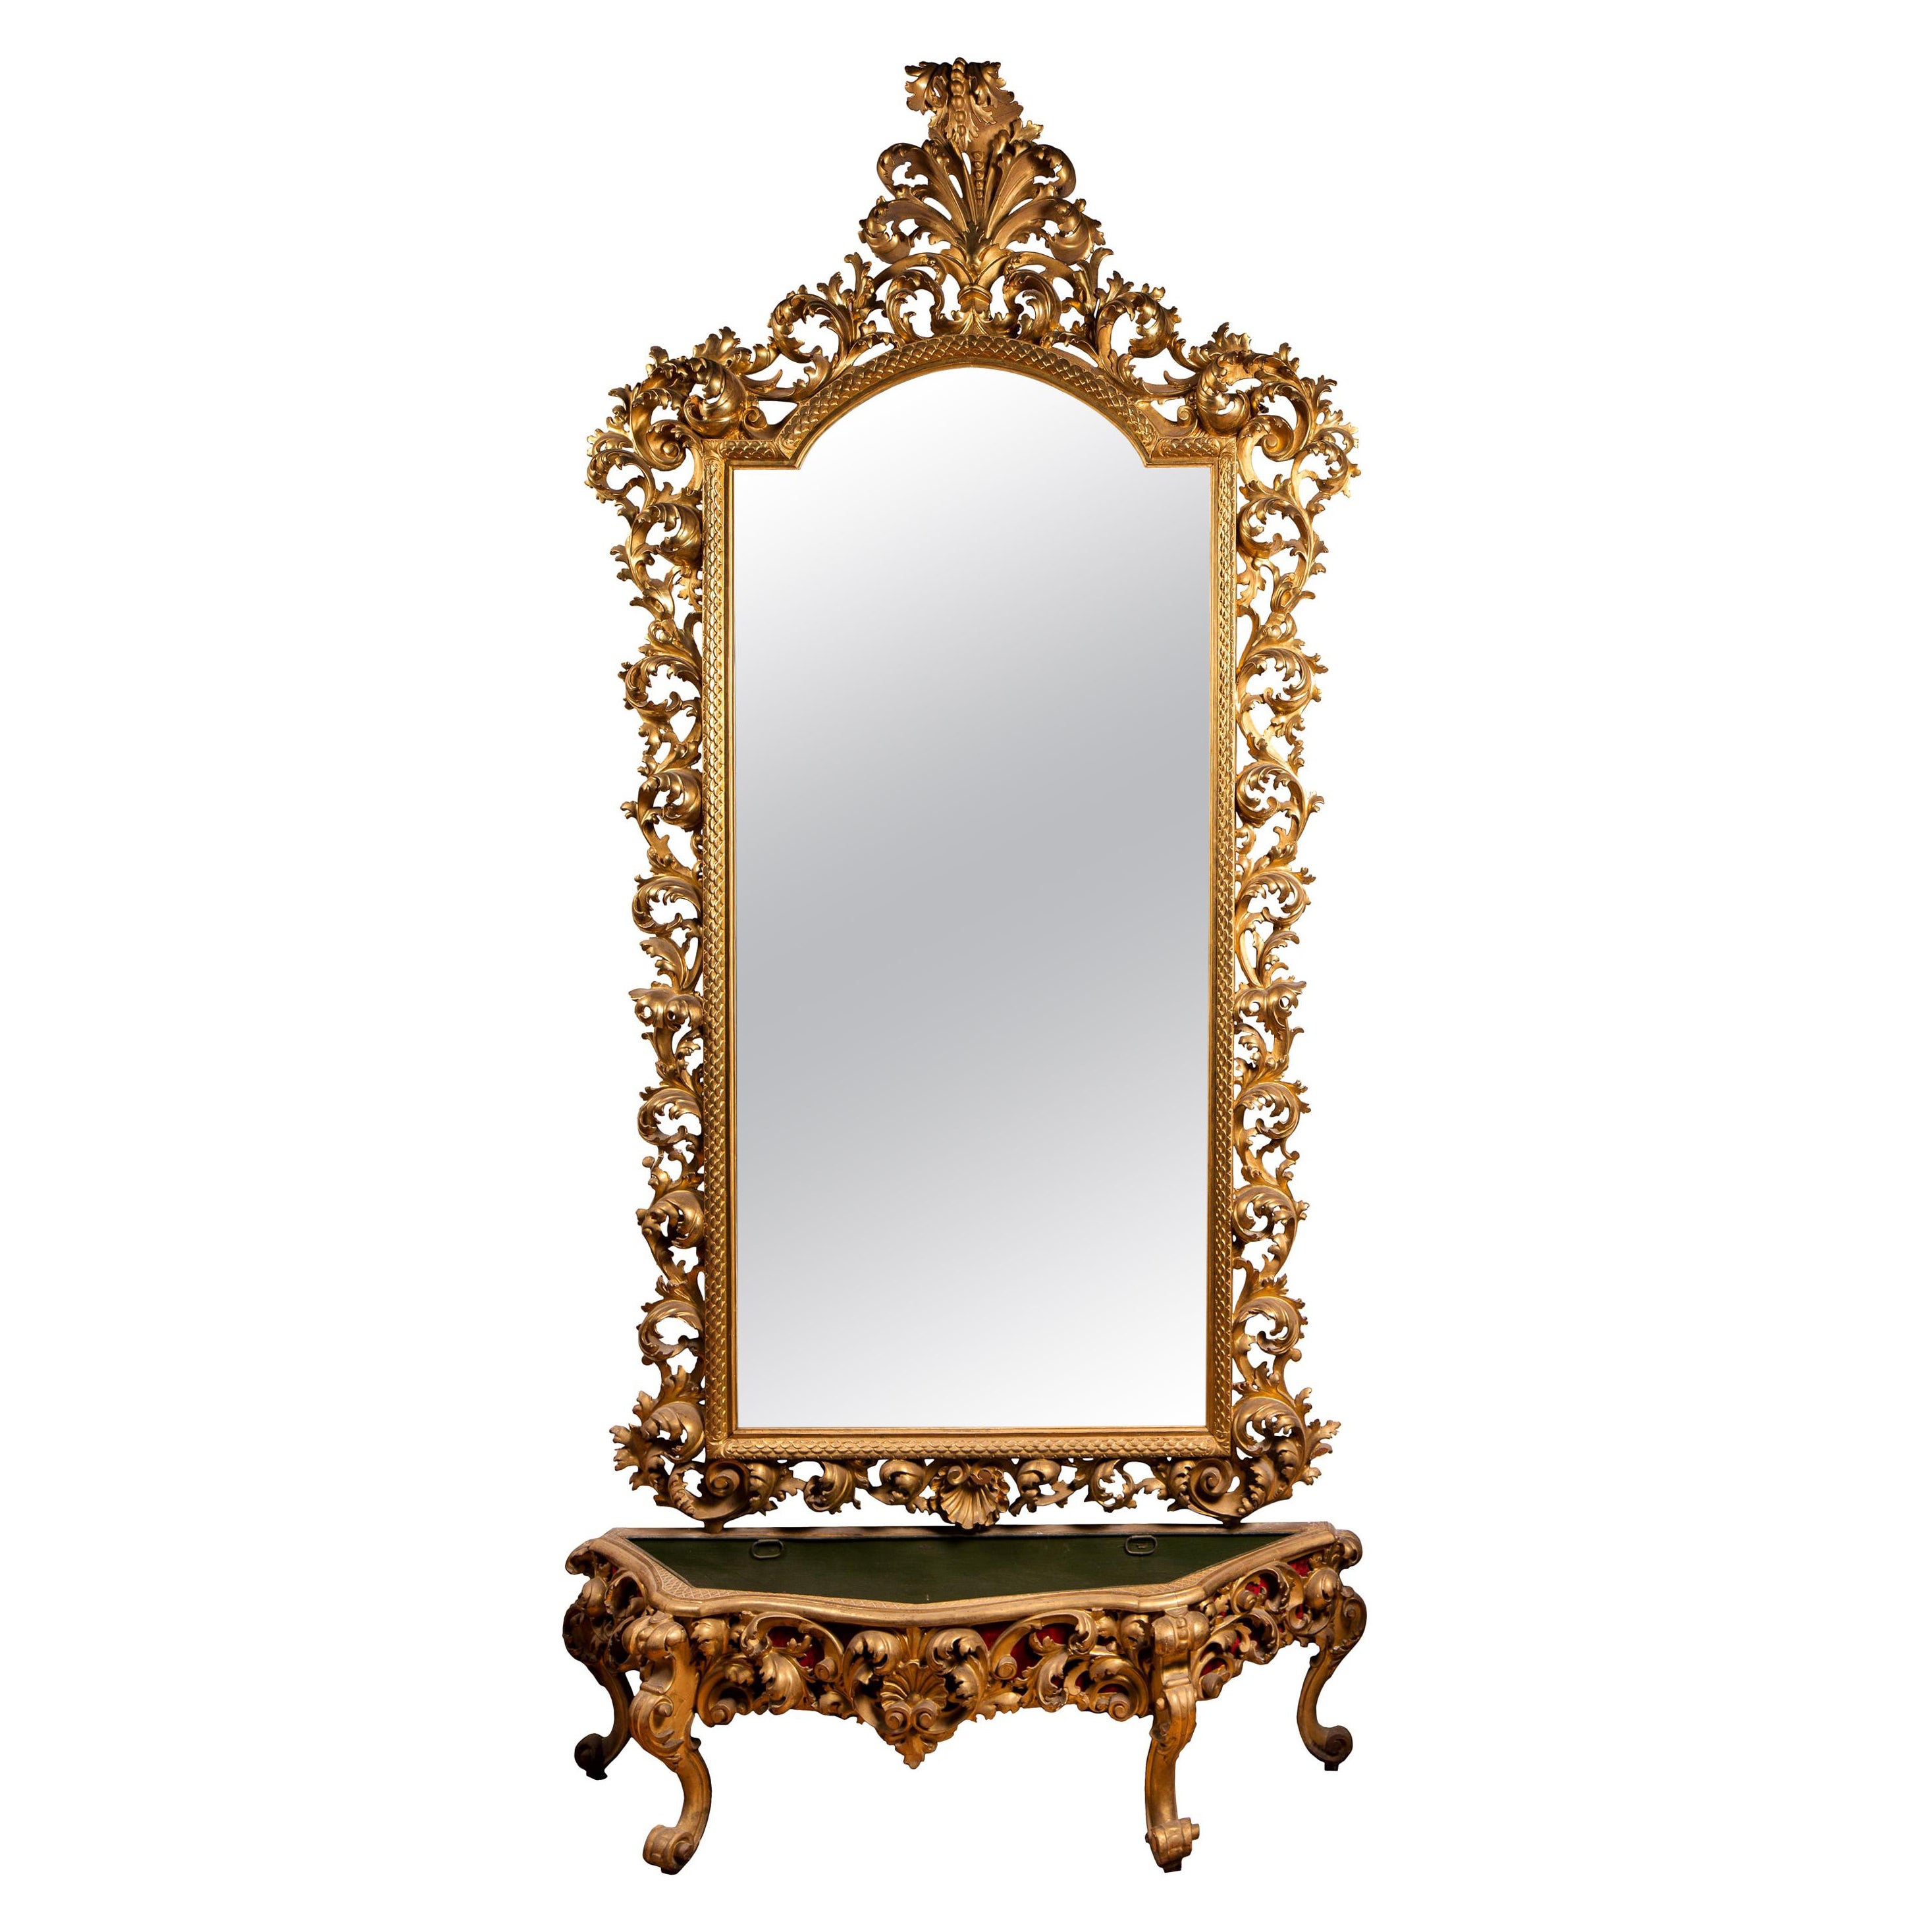 Dramatic, Monumental Rococo Florentine Giltwood Mirror with Matching Planter 